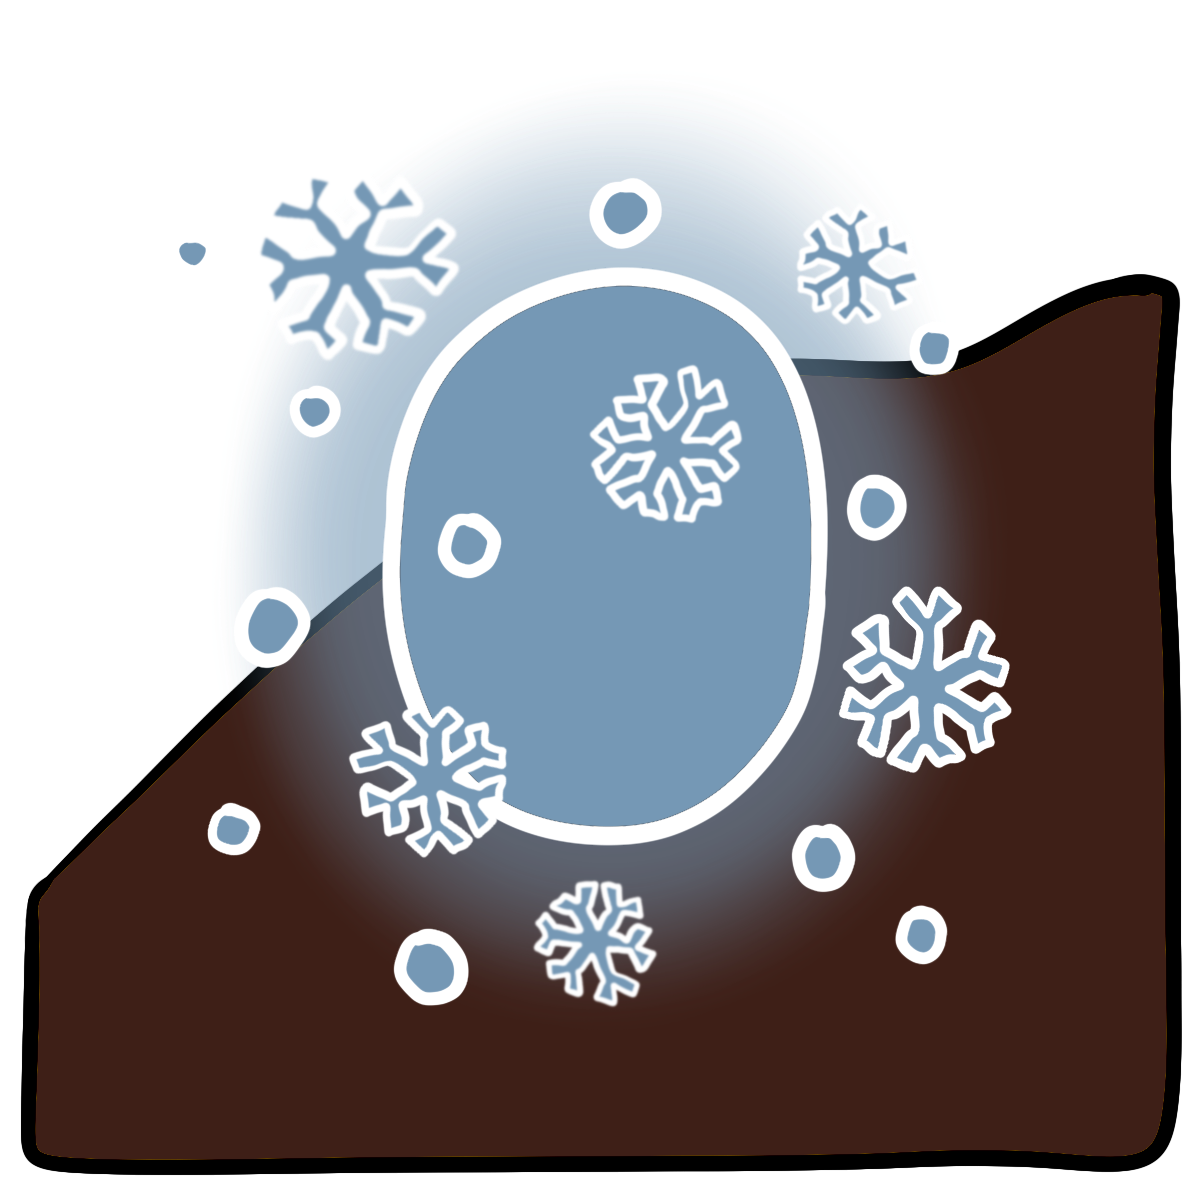 Light blue oval with snowflakes around it. Curved dark brown skin fills the bottom half of the background.